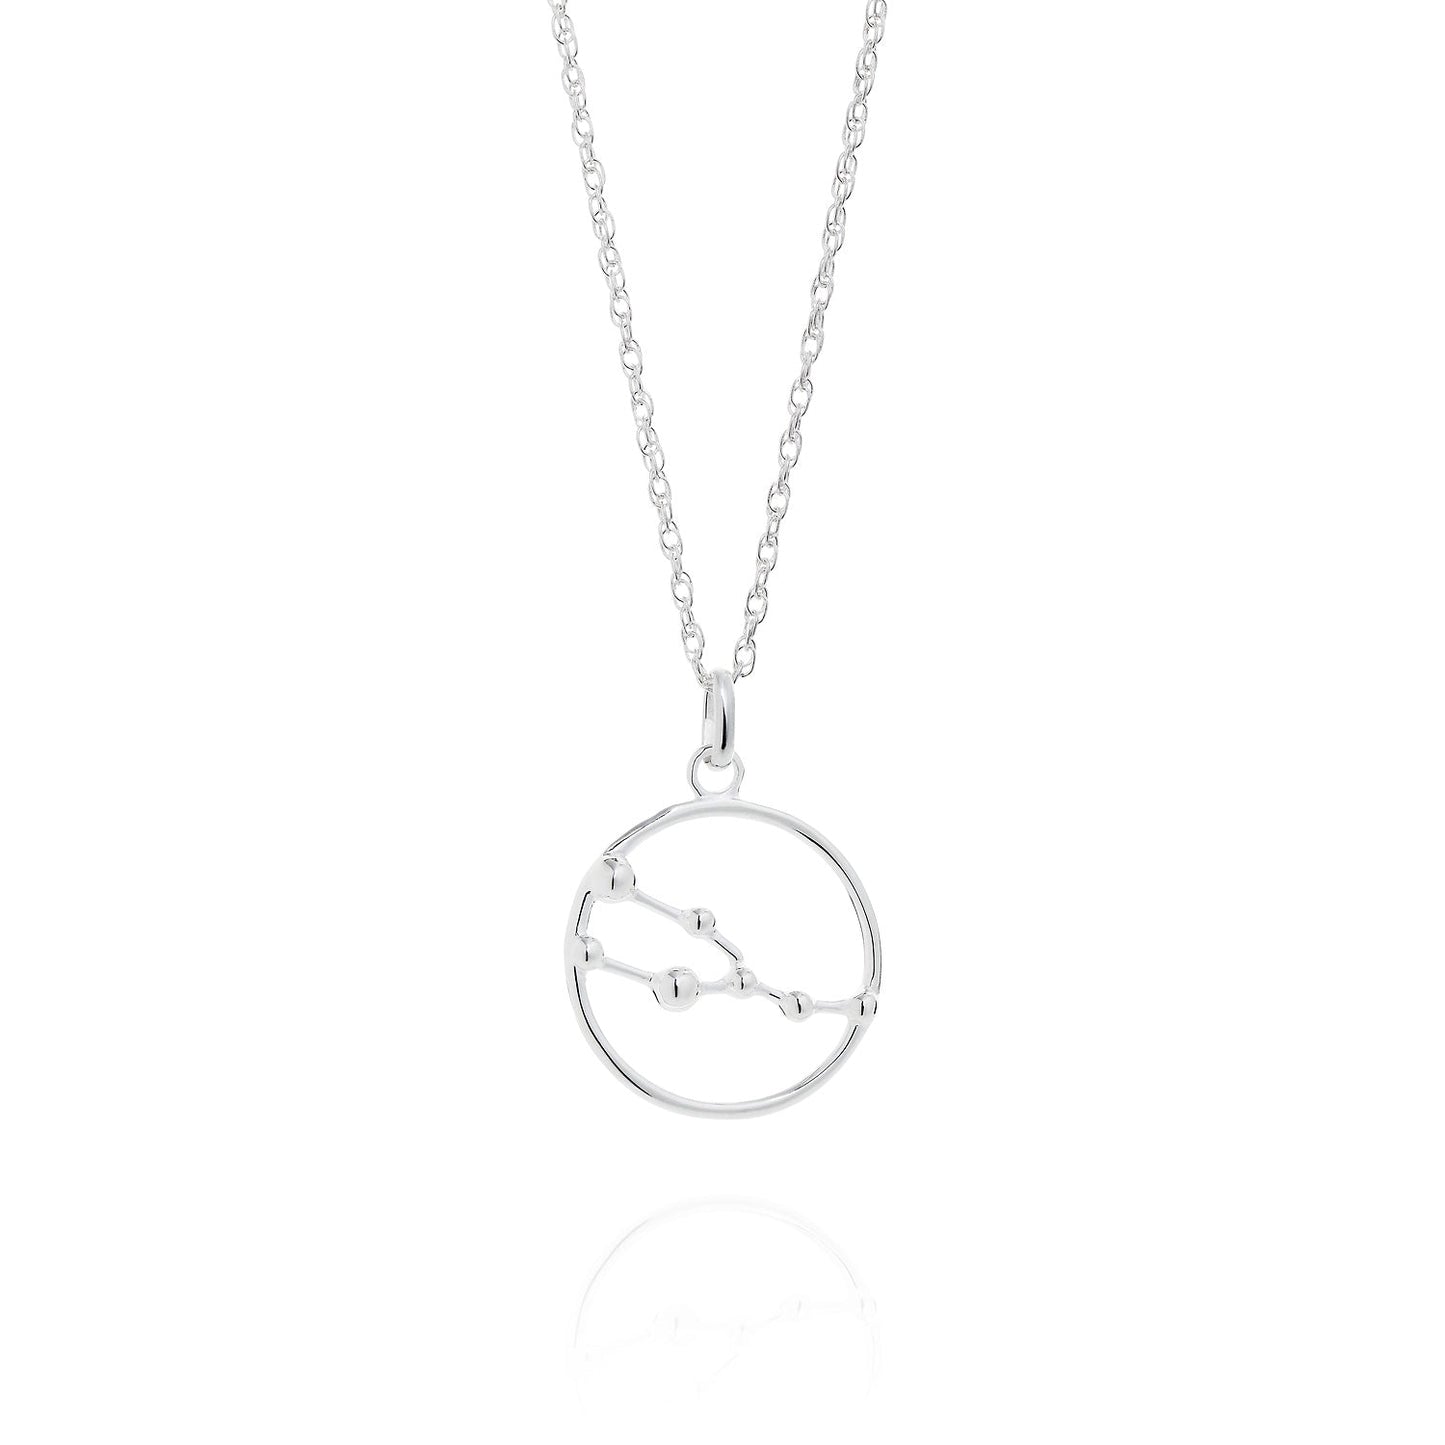 Astrology Star Sign Silver Necklace by Yasmin Everley